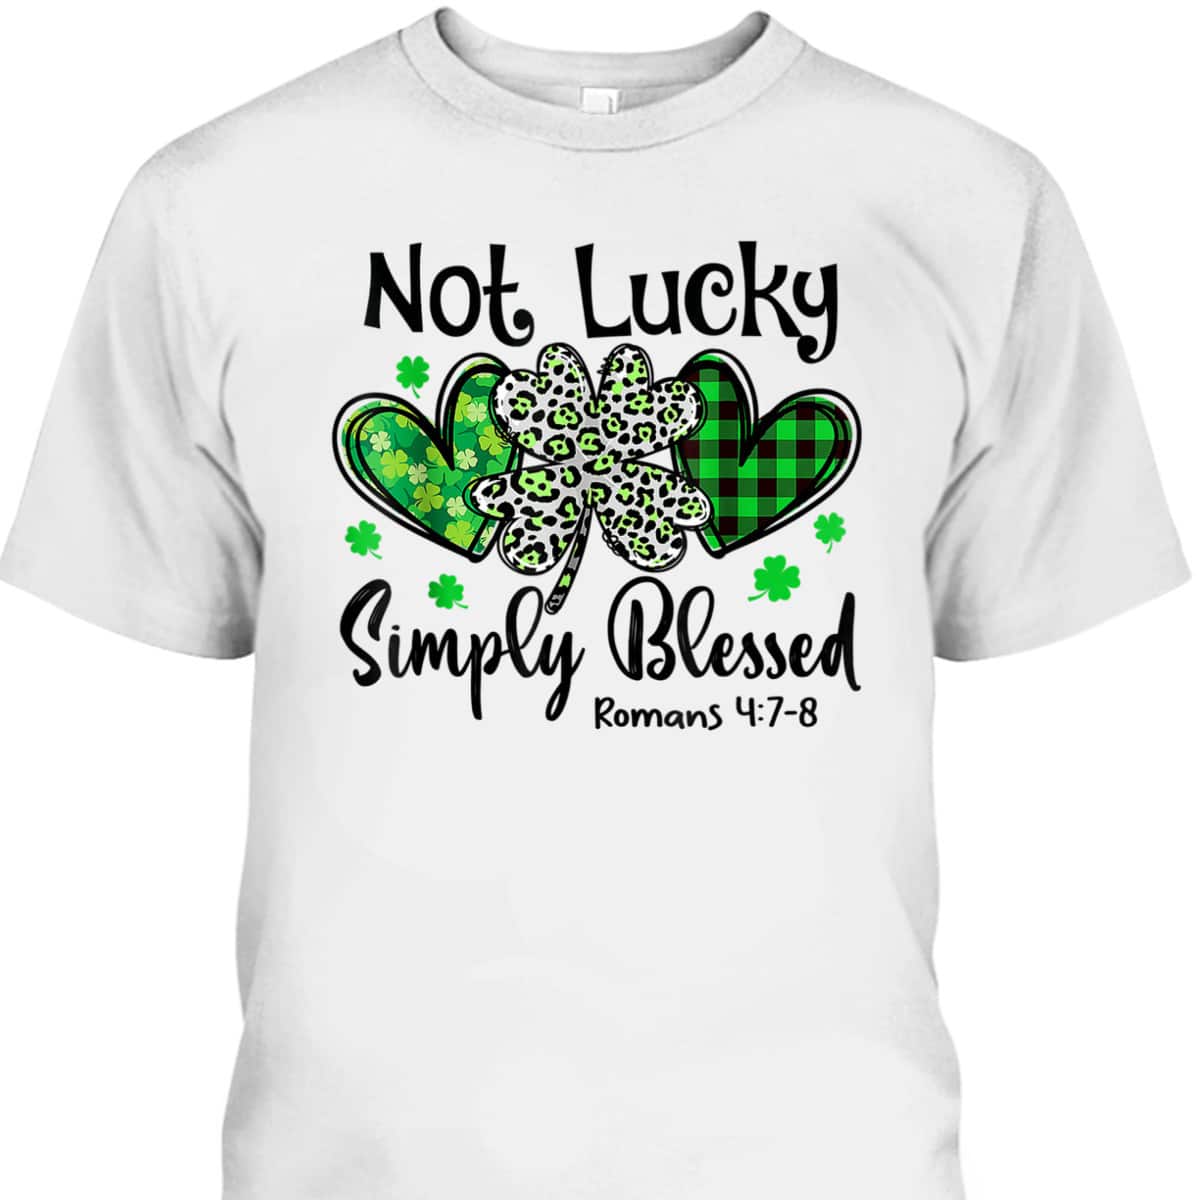 Not Lucky Simply Blessed Romans 4:7-8 Christian Faith St Patrick's Day T-Shirt